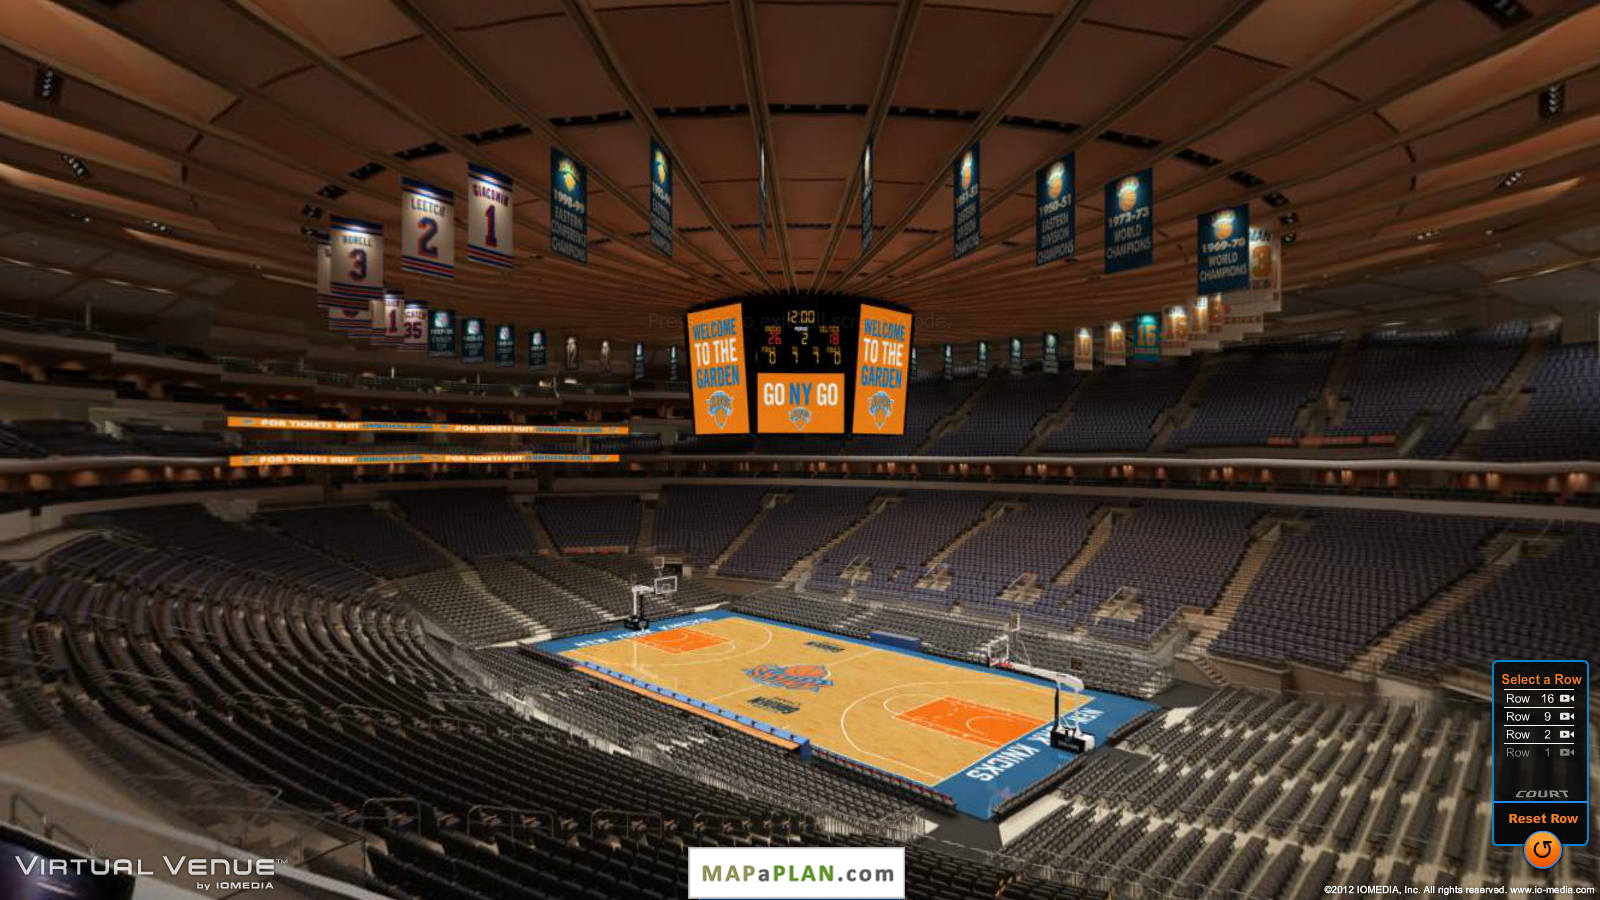  214   Madison Square Garden seating chart   High HD Wallpaper 1600x900